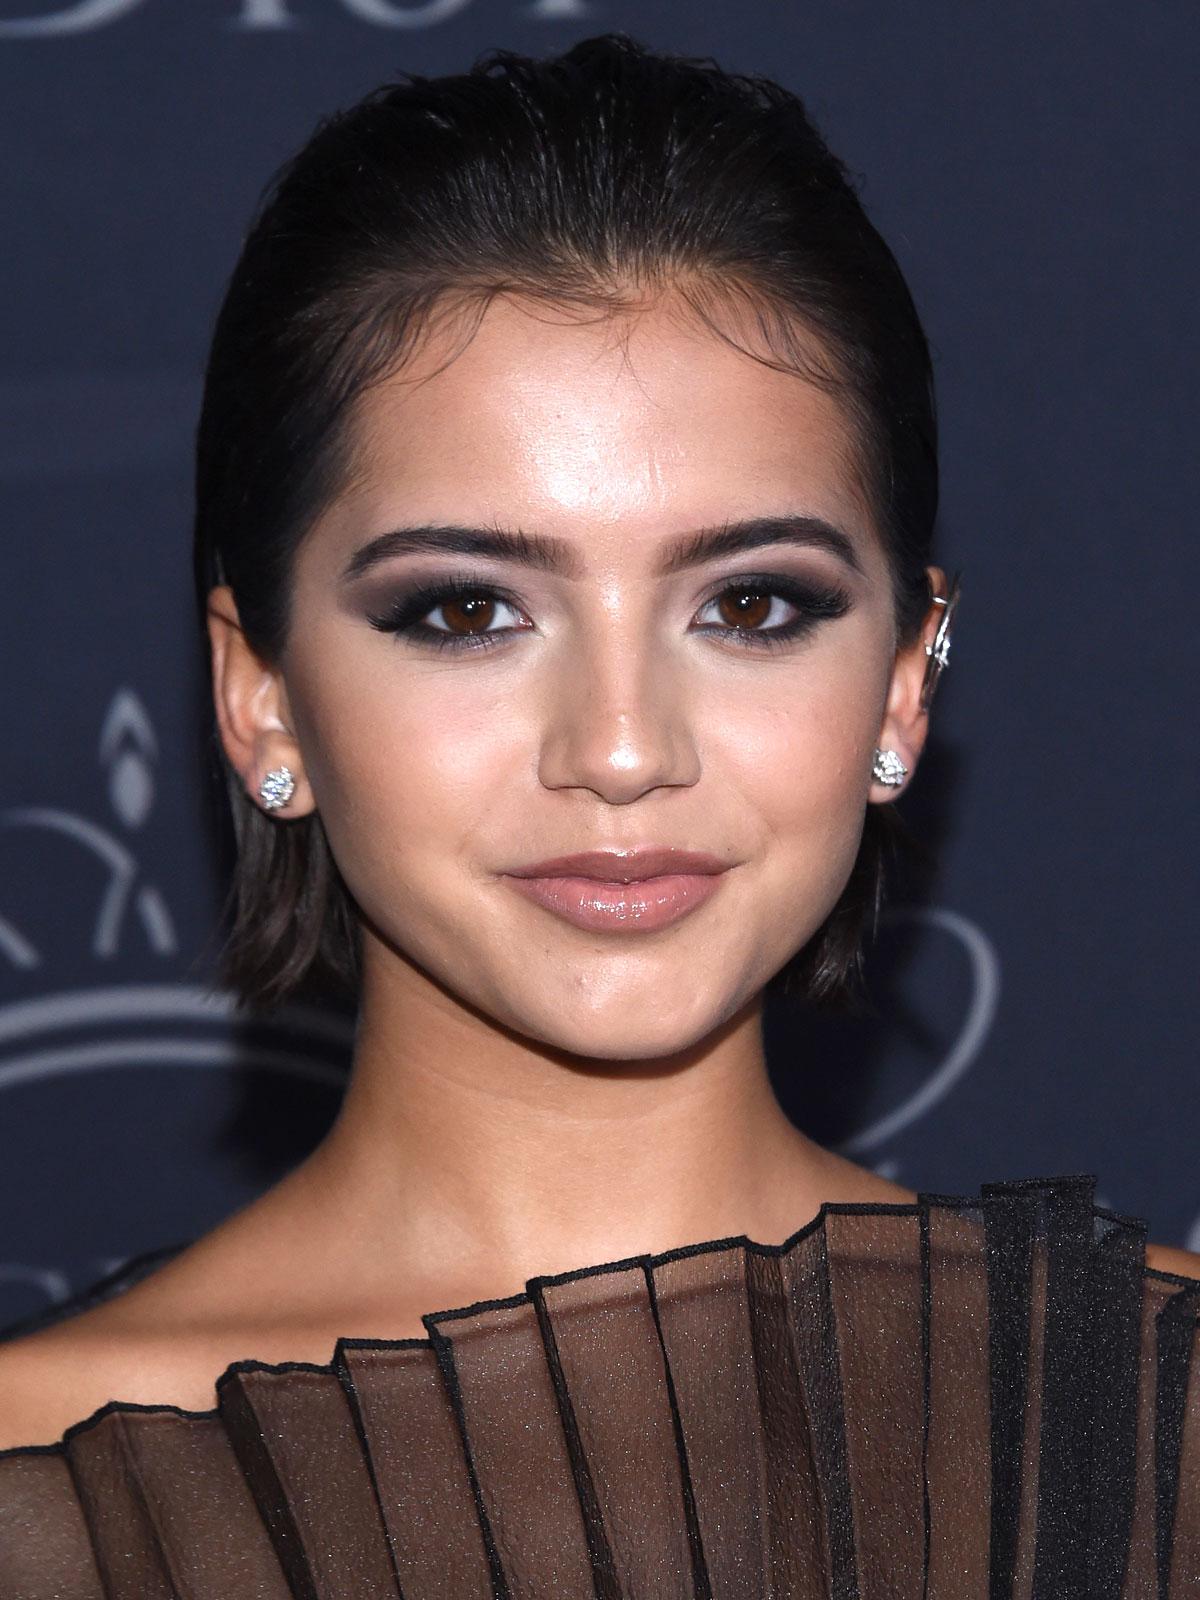 70+ Hot Pictures Of Isabela Moner Which Will Rock Your World 21